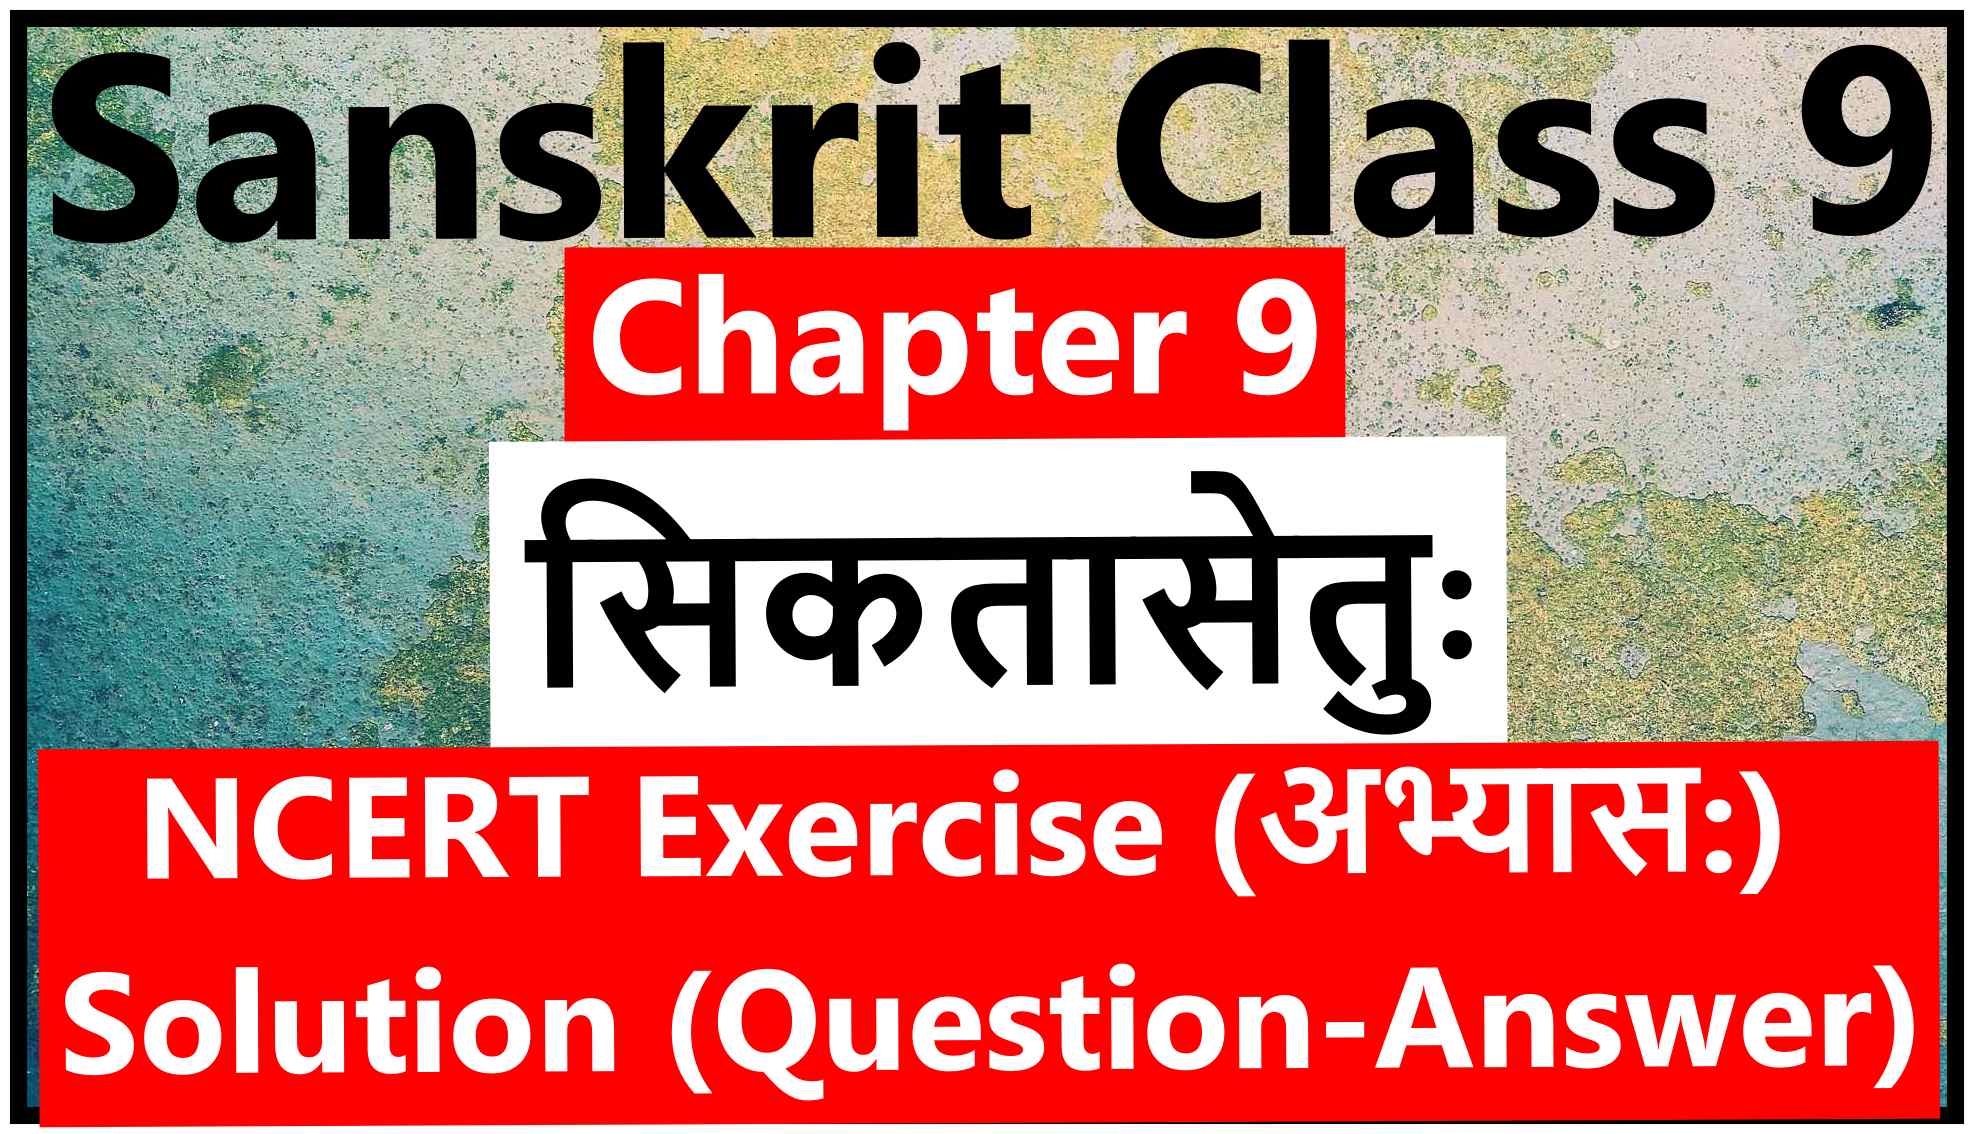 Sanskrit Class 9 - Chapter 9 - सिकतासेतुः - NCERT Exercise Solution (Question-Answer)